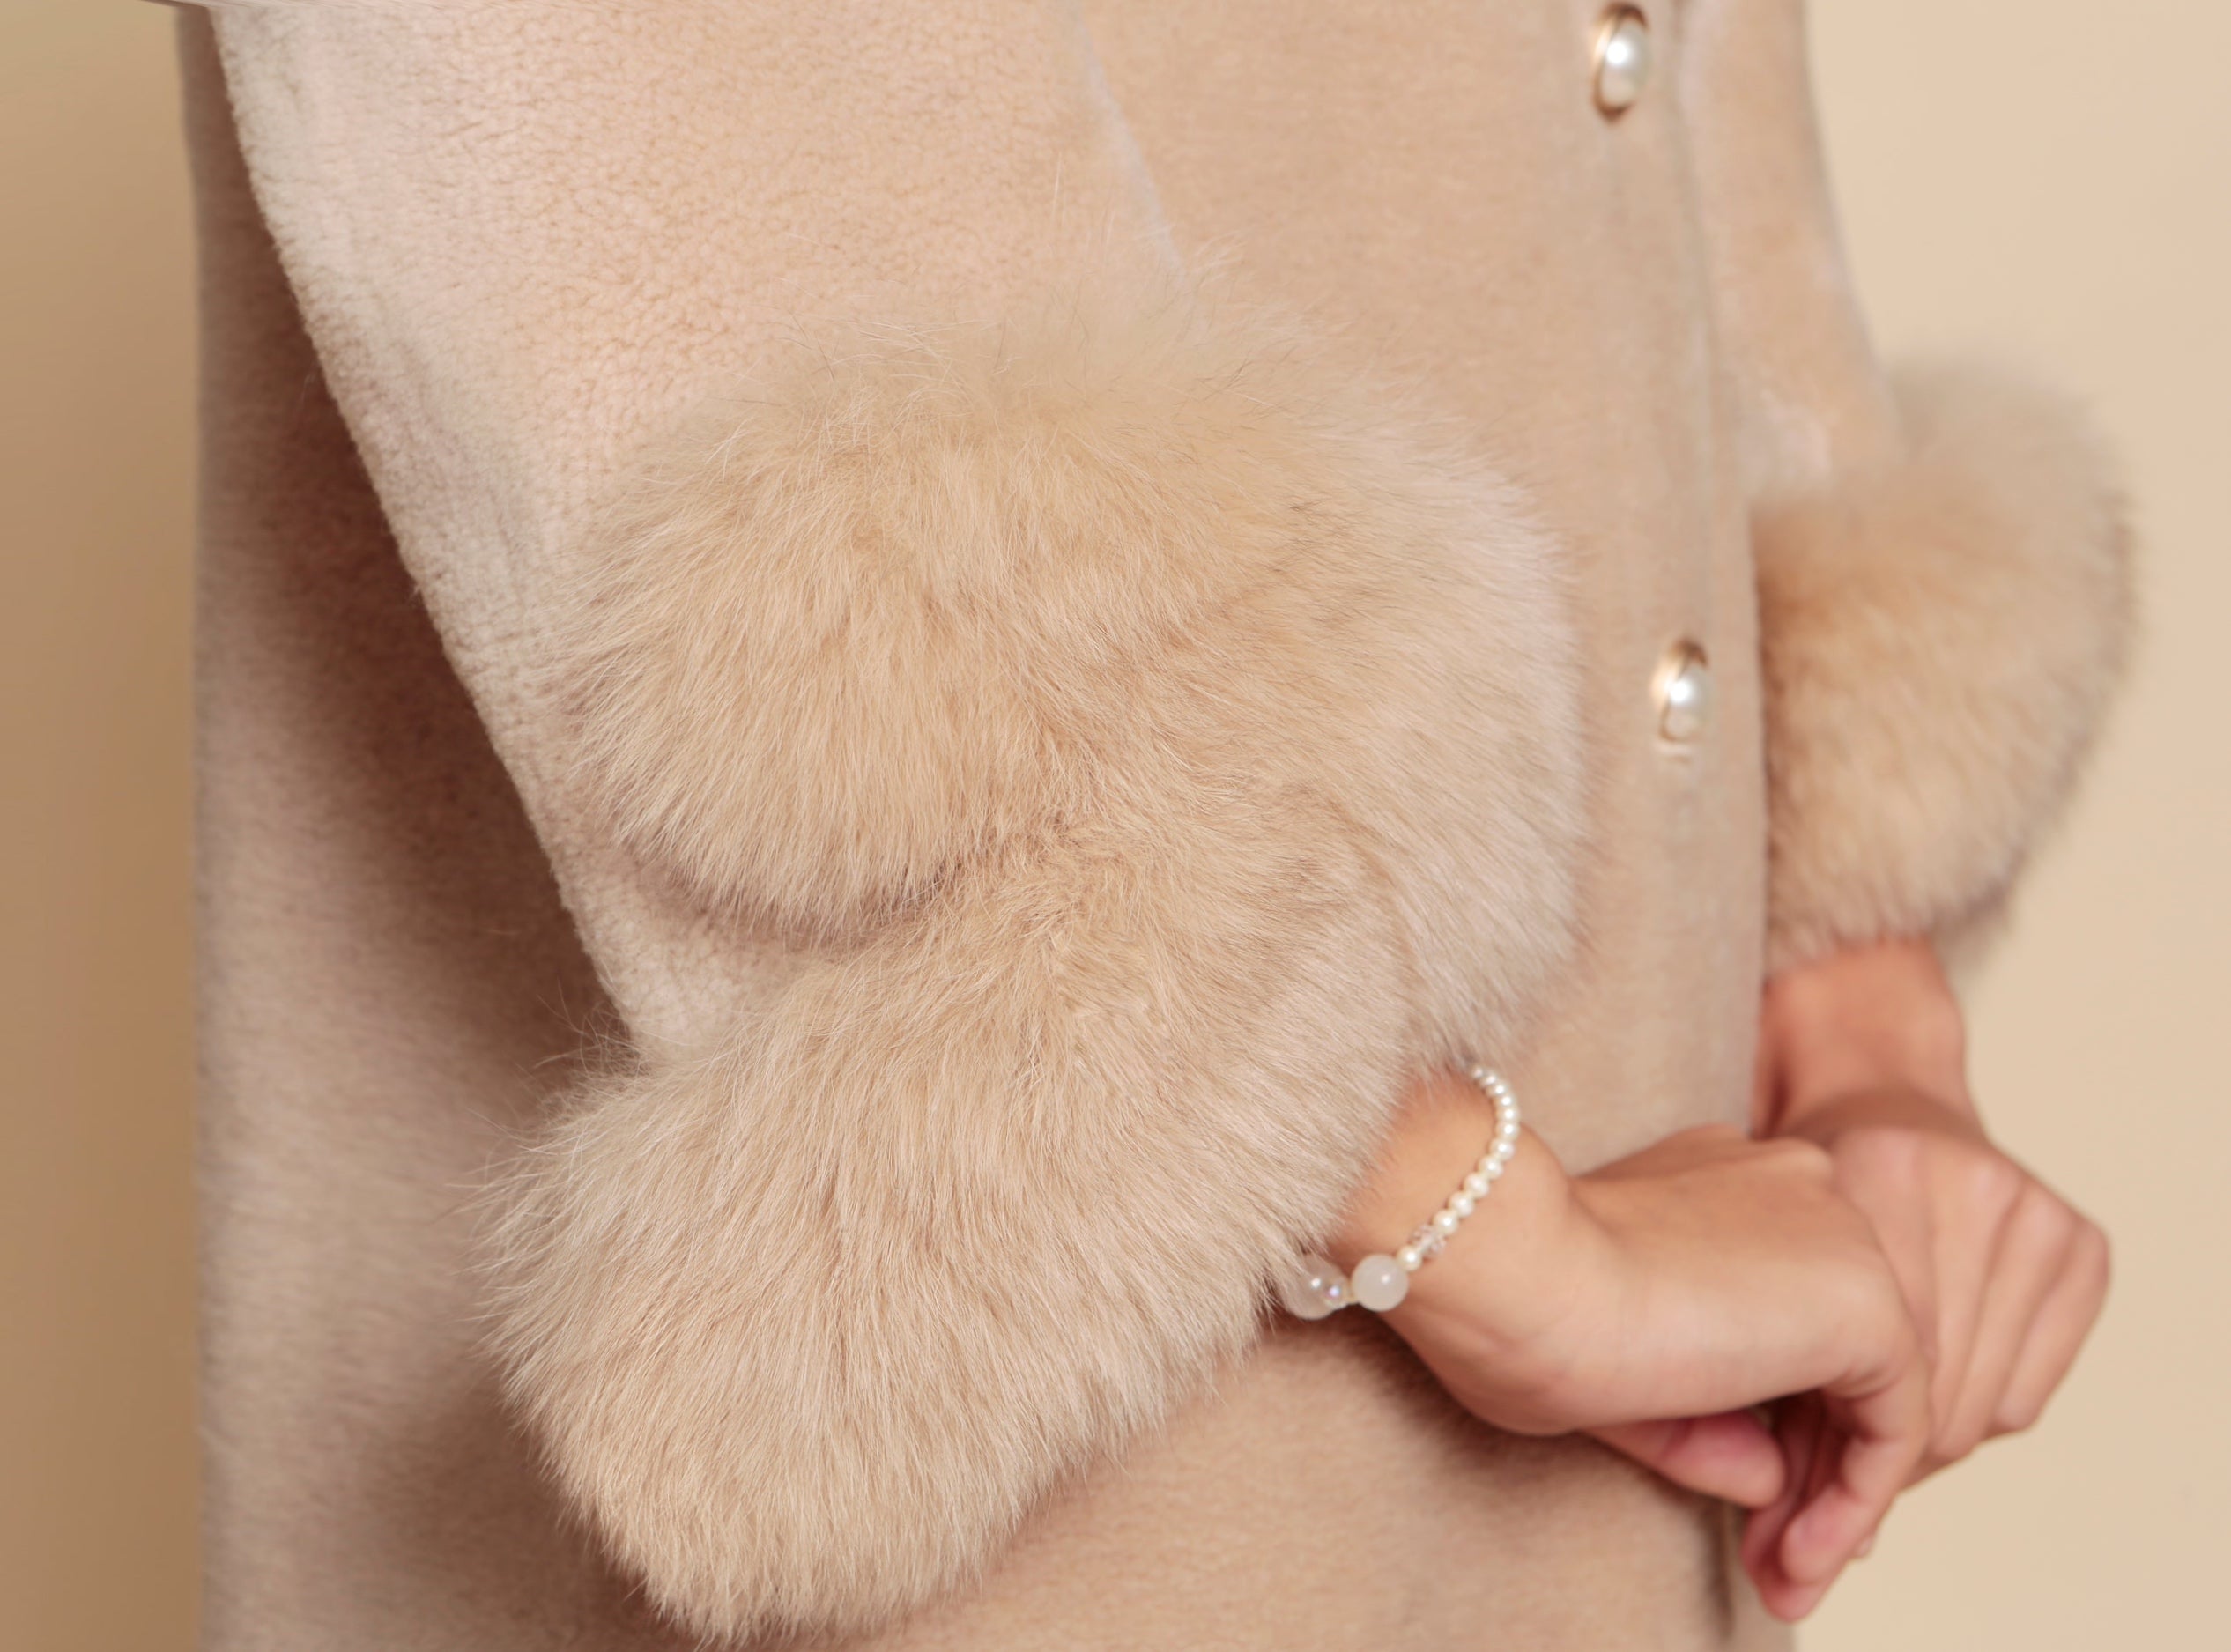 'Monroe' Wool and Faux Fur Teddy Coat in Cammello